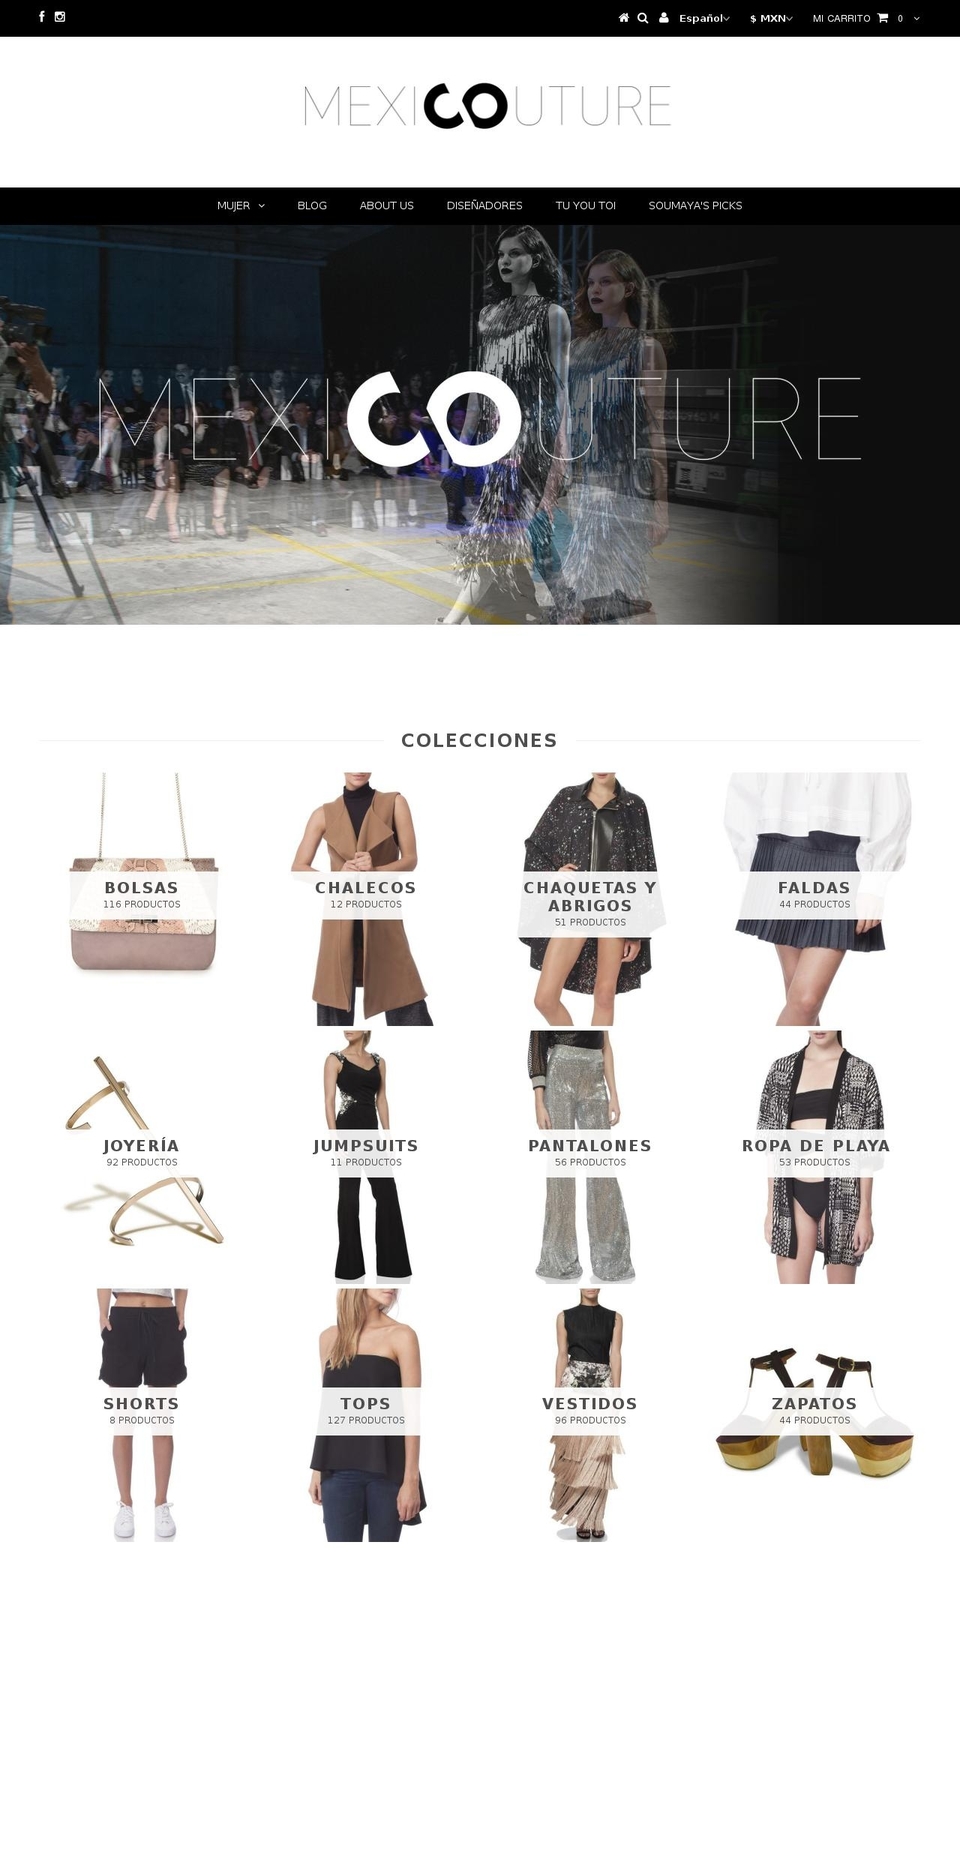 Influence Shopify theme site example mexicouture.mx